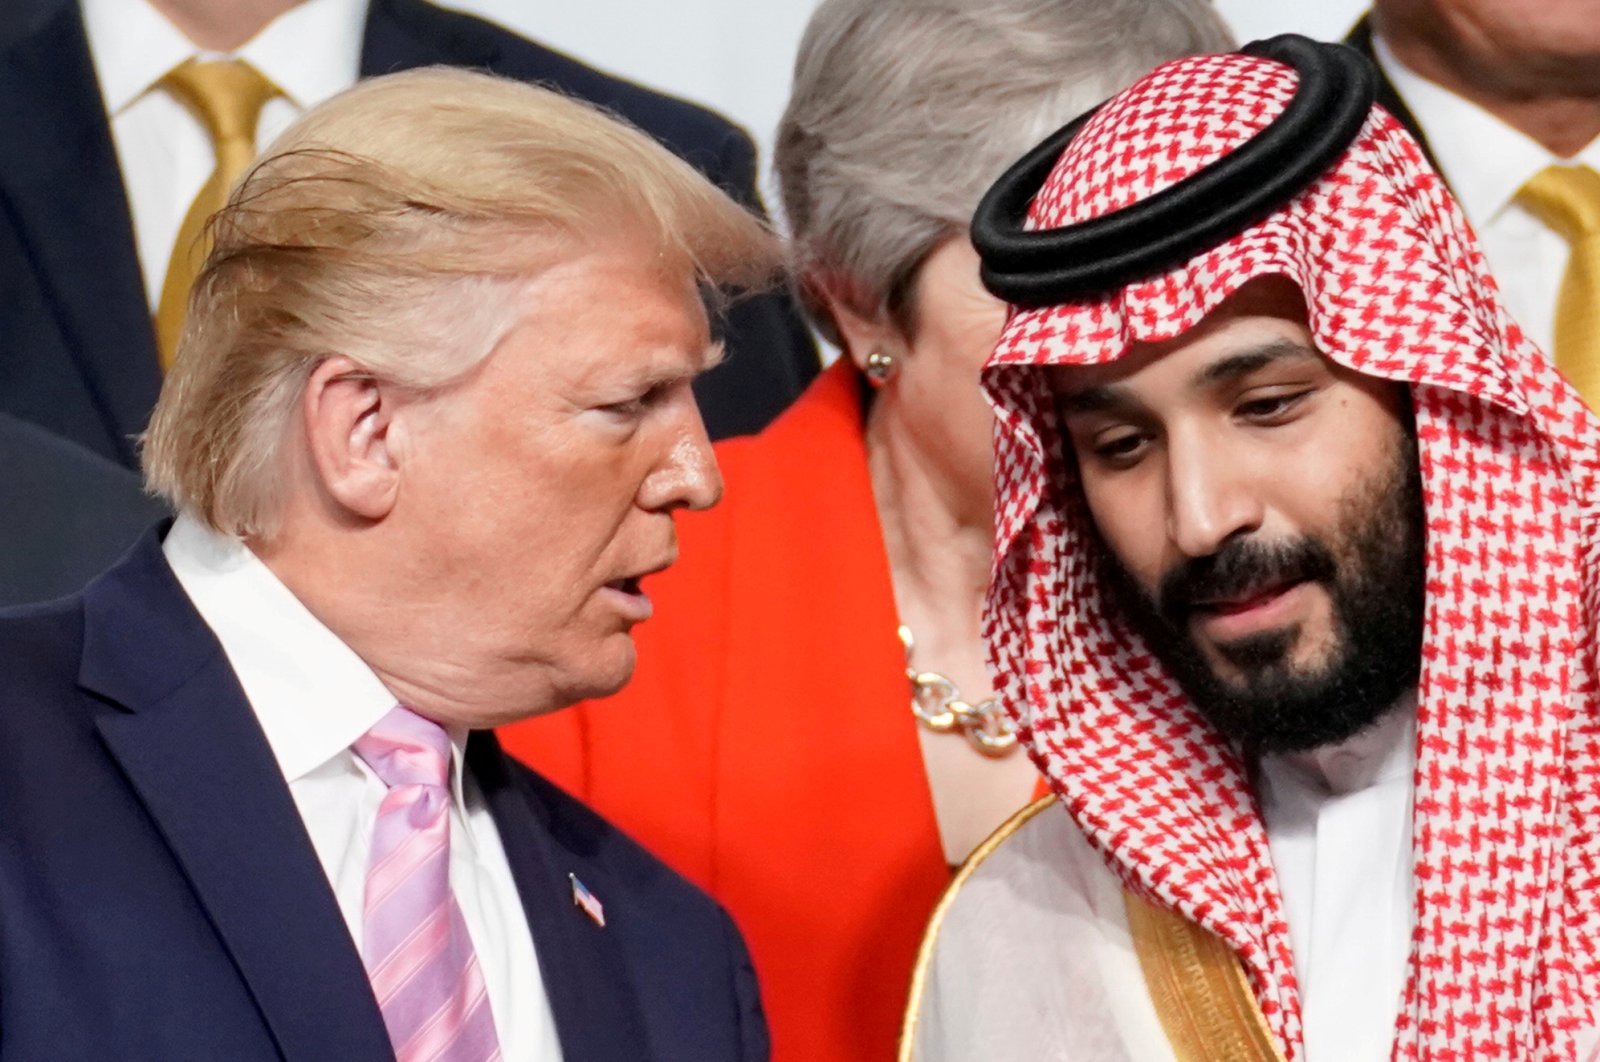 U.S. President Donald Trump speaks with Saudi Arabia's Crown Prince Mohammed bin Salman during a family photo session with other leaders and attendees at the G20 leaders summit in Osaka, Japan, June 28, 2019.  (REUTERS Photo)